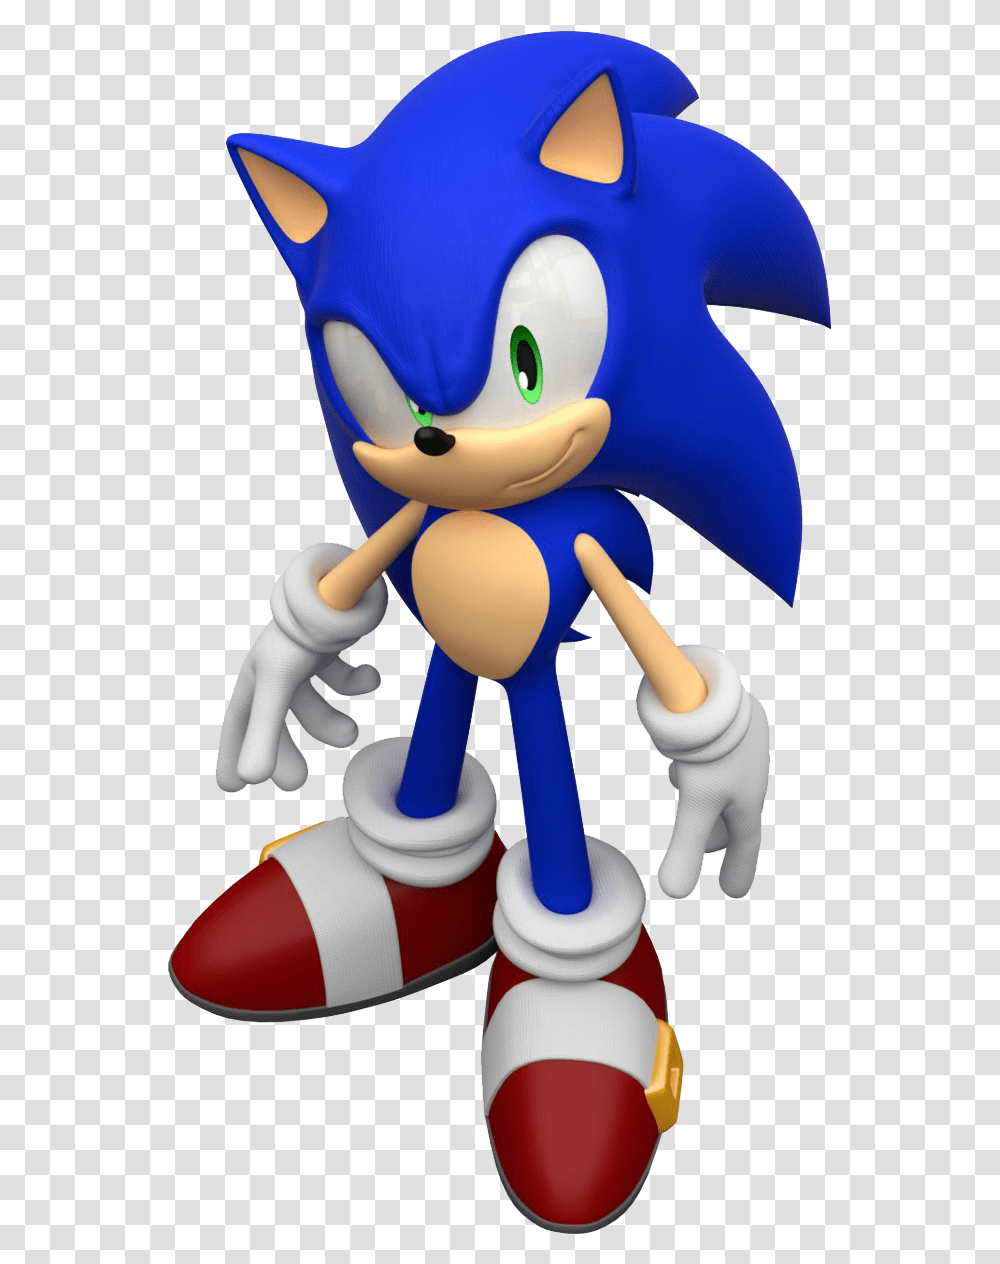 Sonic The Hedgehog Background Sonic The Hedgehog, Toy, Figurine, Life Buoy, Hand Transparent Png